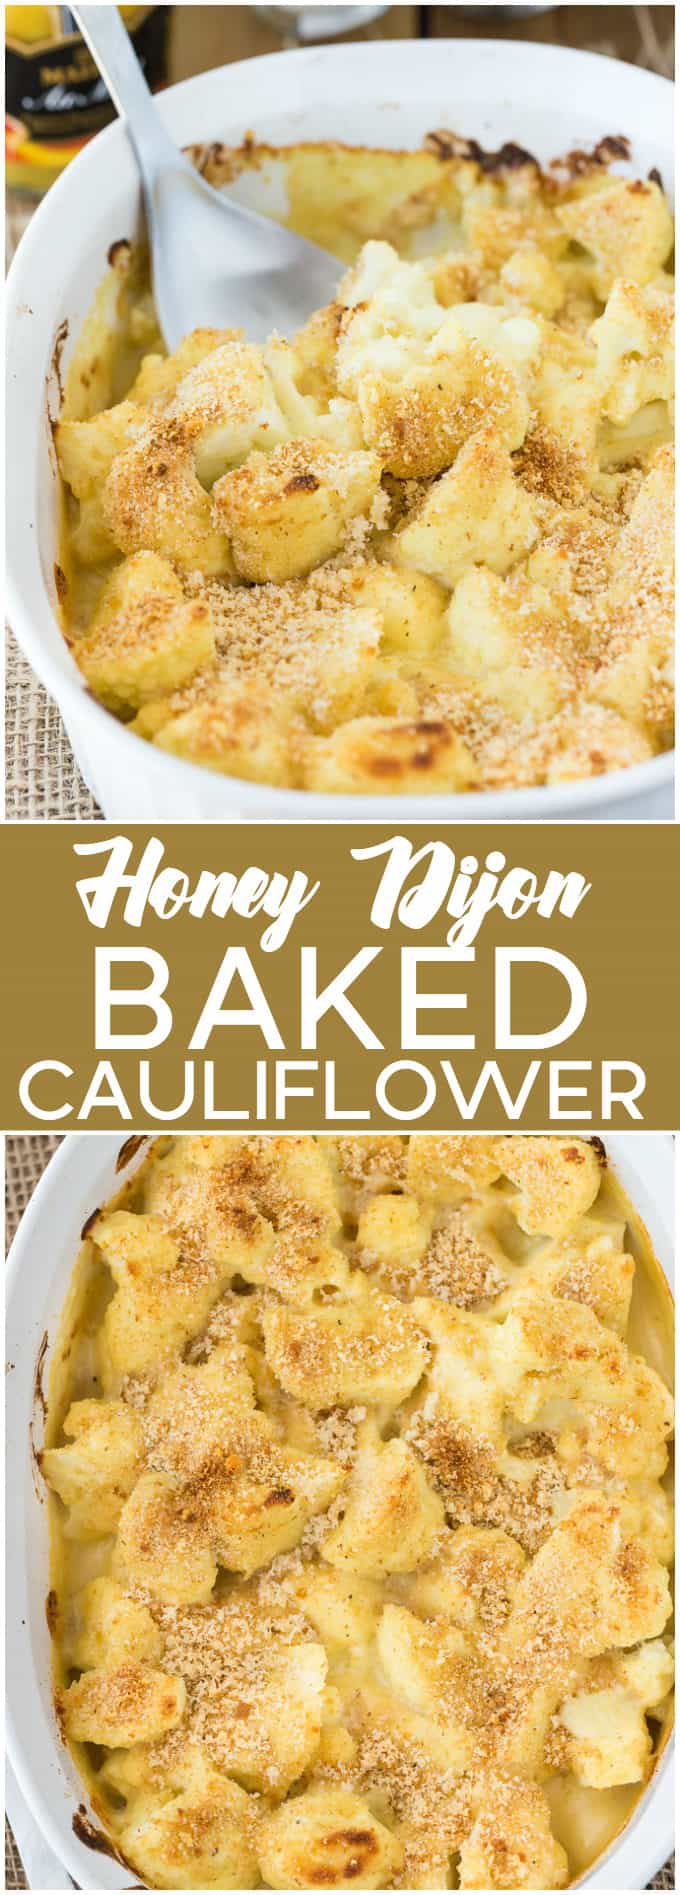 Honey Dijon Baked Cauliflower - This easy side dish is hearty enough for Meatless Monday! This cauliflower casserole recipe is super tangy and covered in breadcrumbs and Parmesan cheese. Yum!